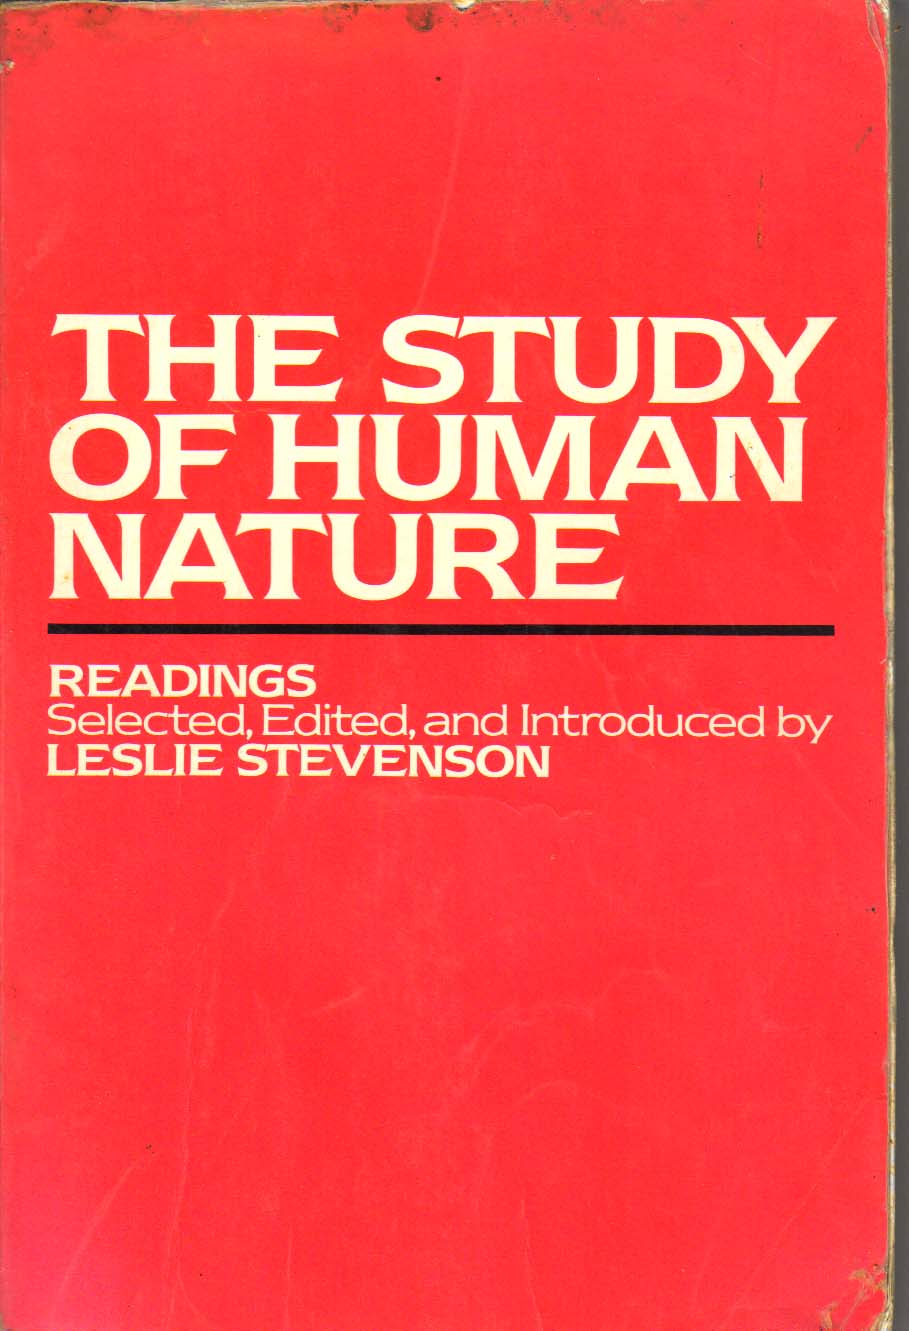 thesis about human nature